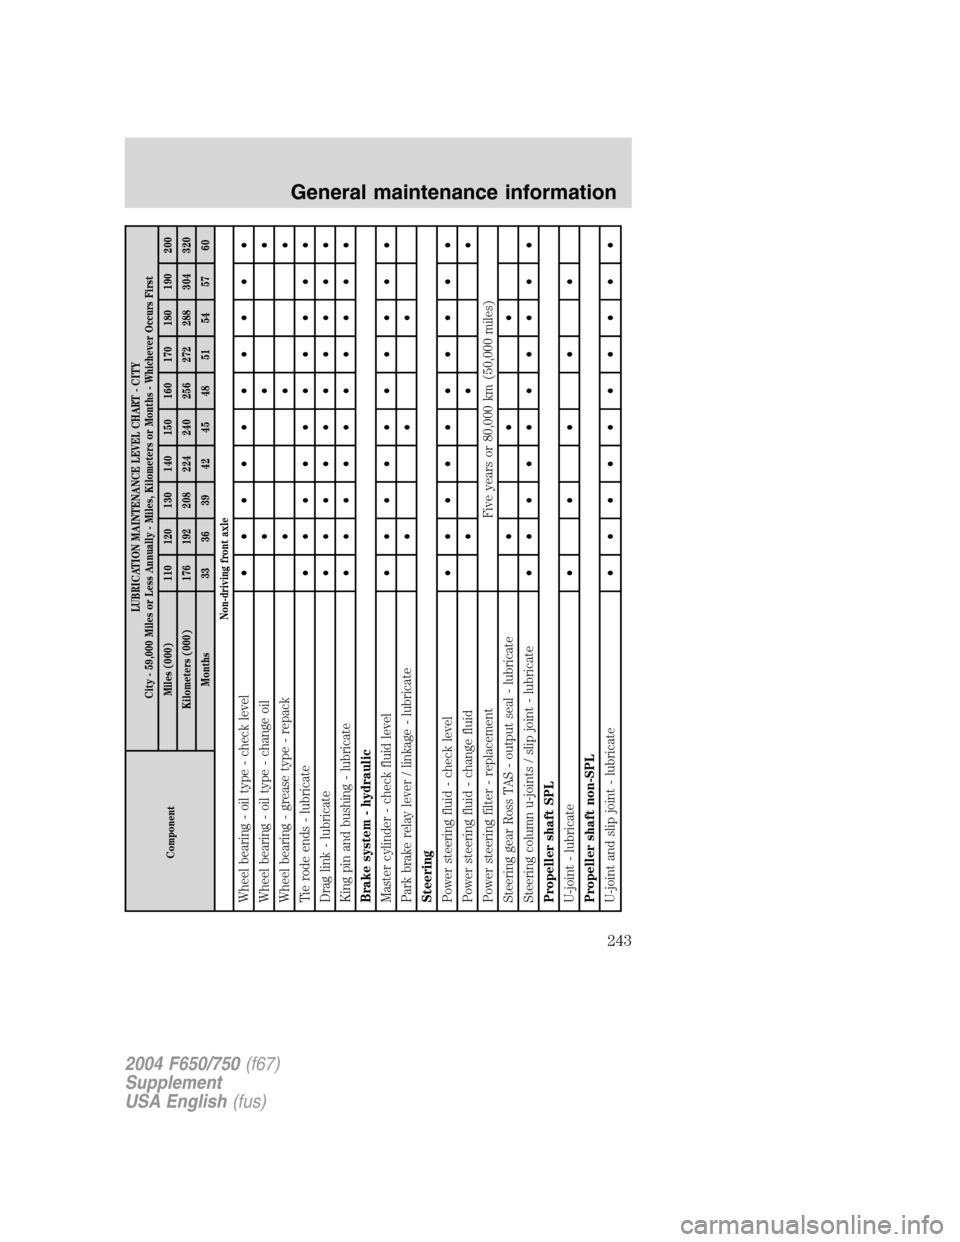 FORD F750 2004 11.G Owners Manual ComponentLUBRICATION MAINTENANCE LEVEL CHART - CITY
City - 59,000 Miles or Less Annually - Miles, Kilometers or Months - Whichever Occurs First
Miles (000) 110 120 130 140 150 160 170 180 190 200
Kilo